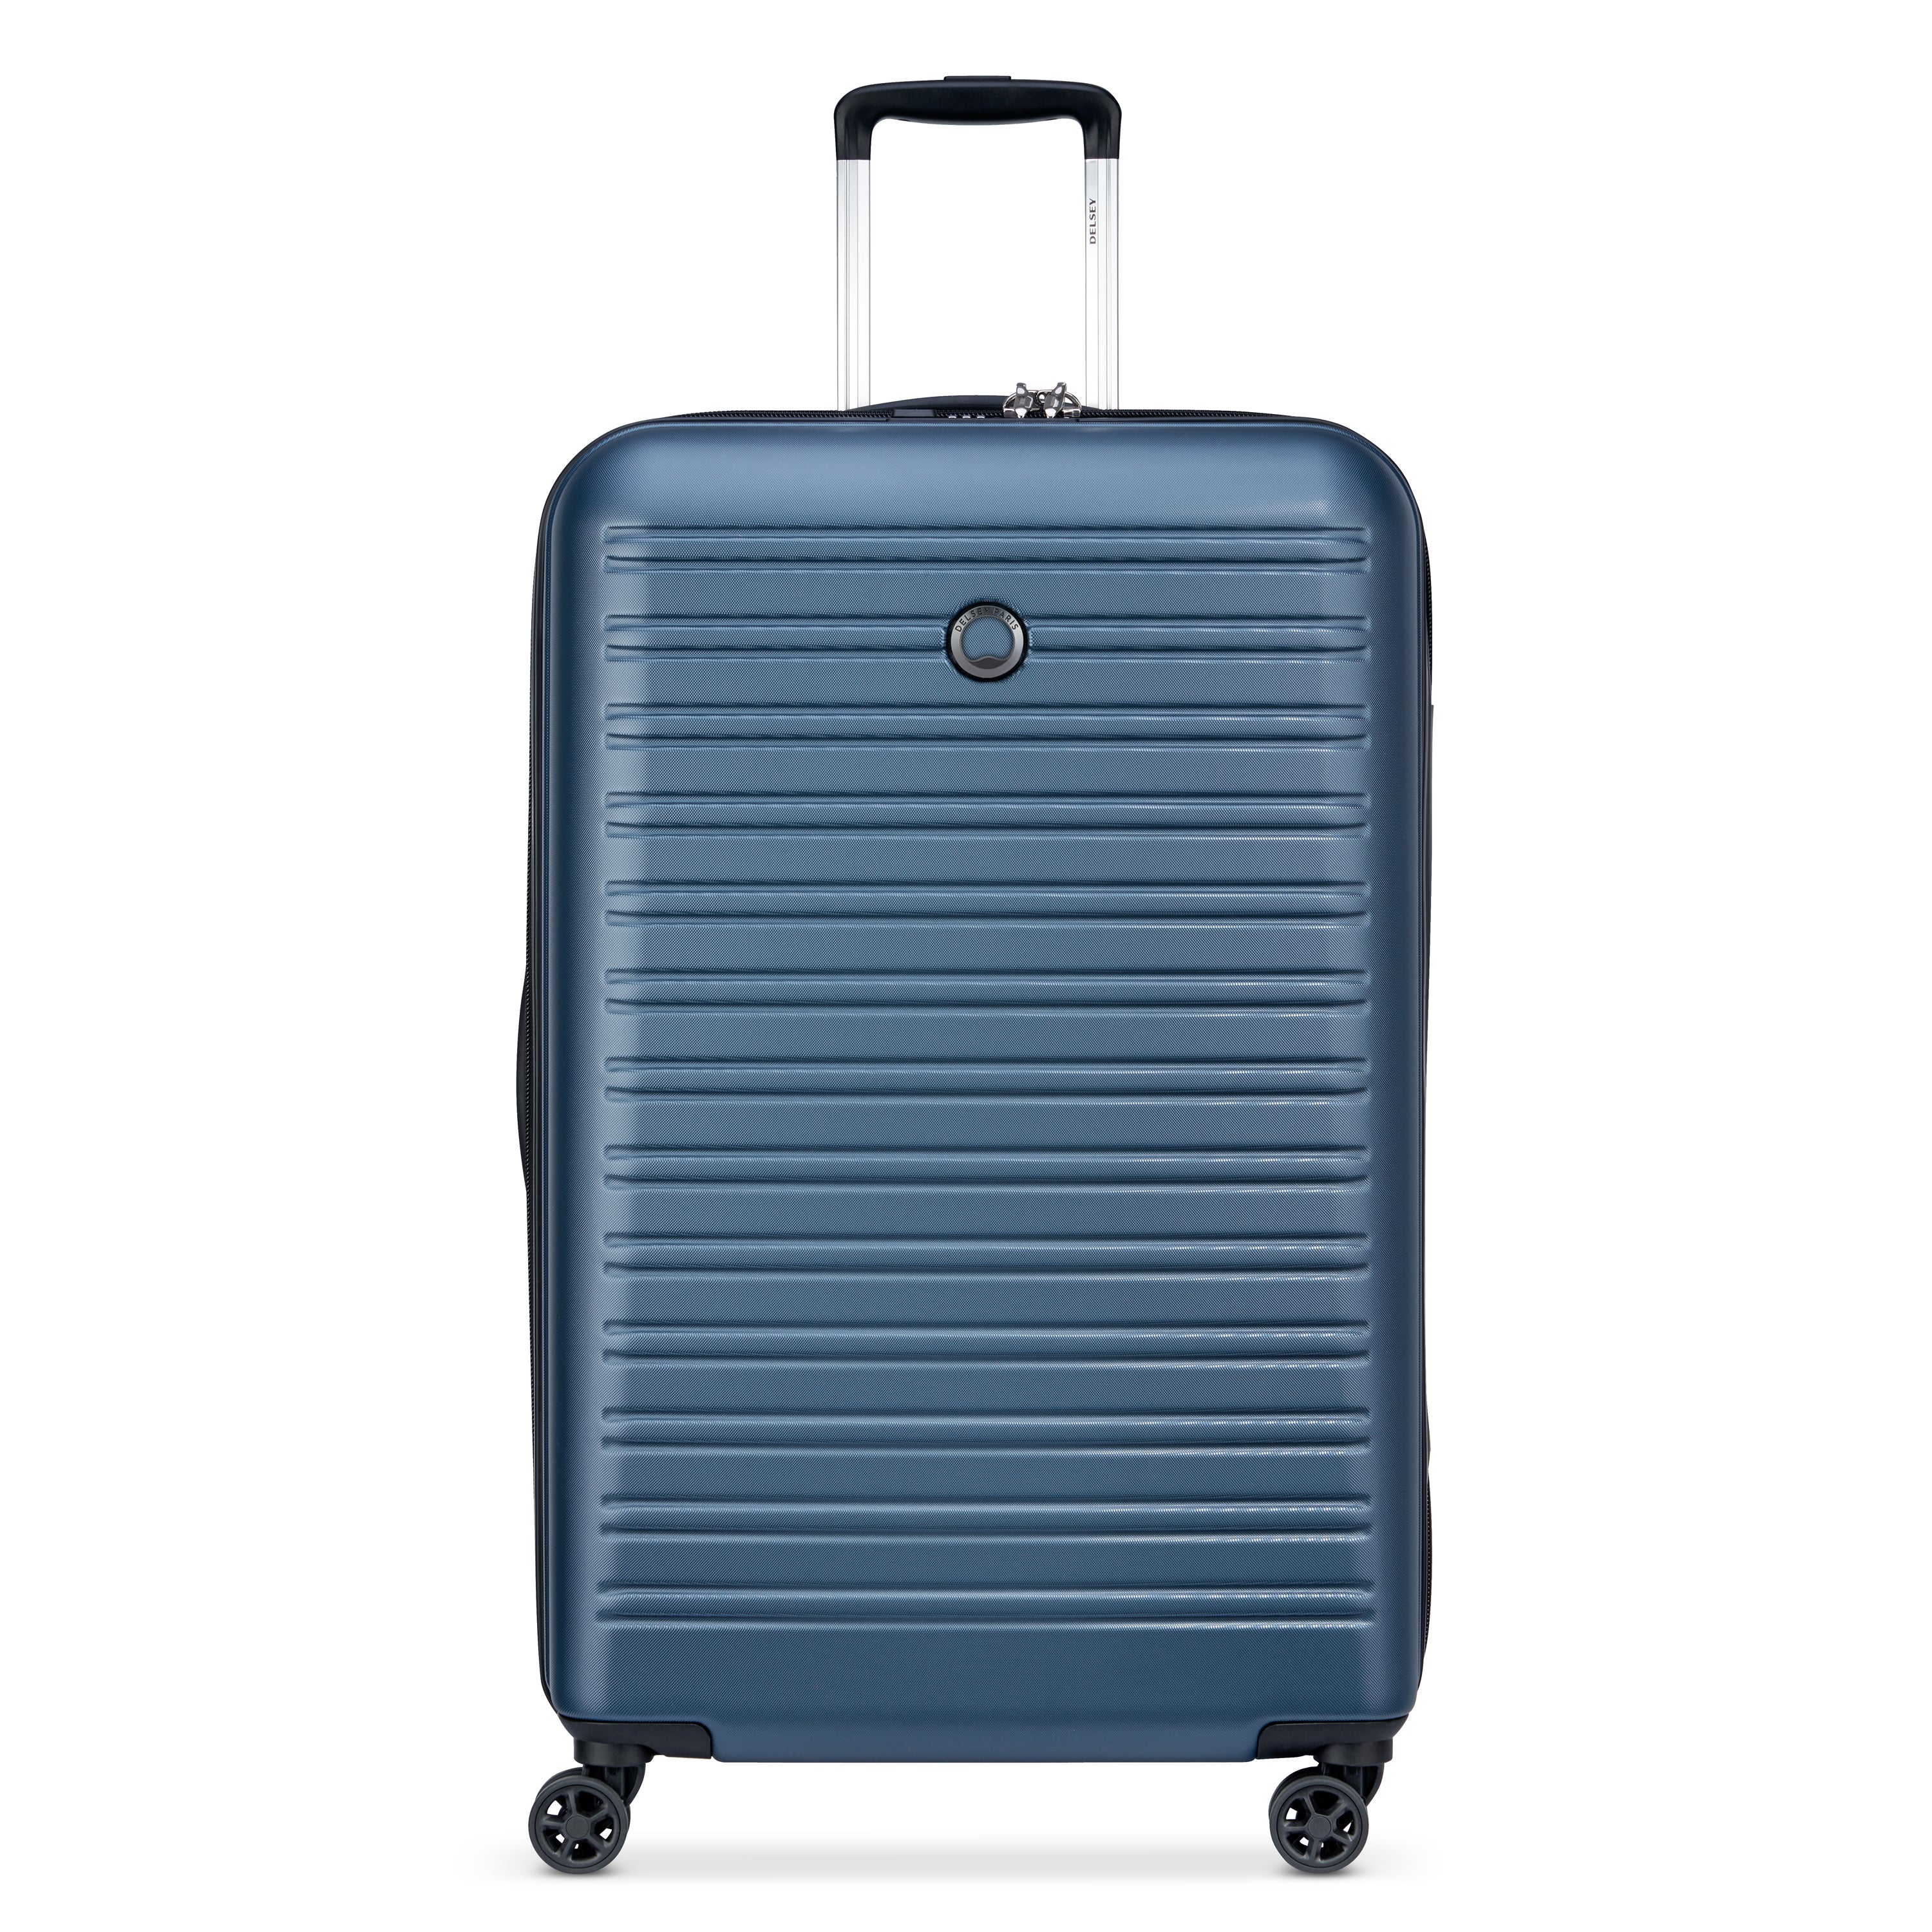 Kent Middeleeuws Raad Our Hardside Suitcases | DELSEY PARIS – DELSEY PARIS INT